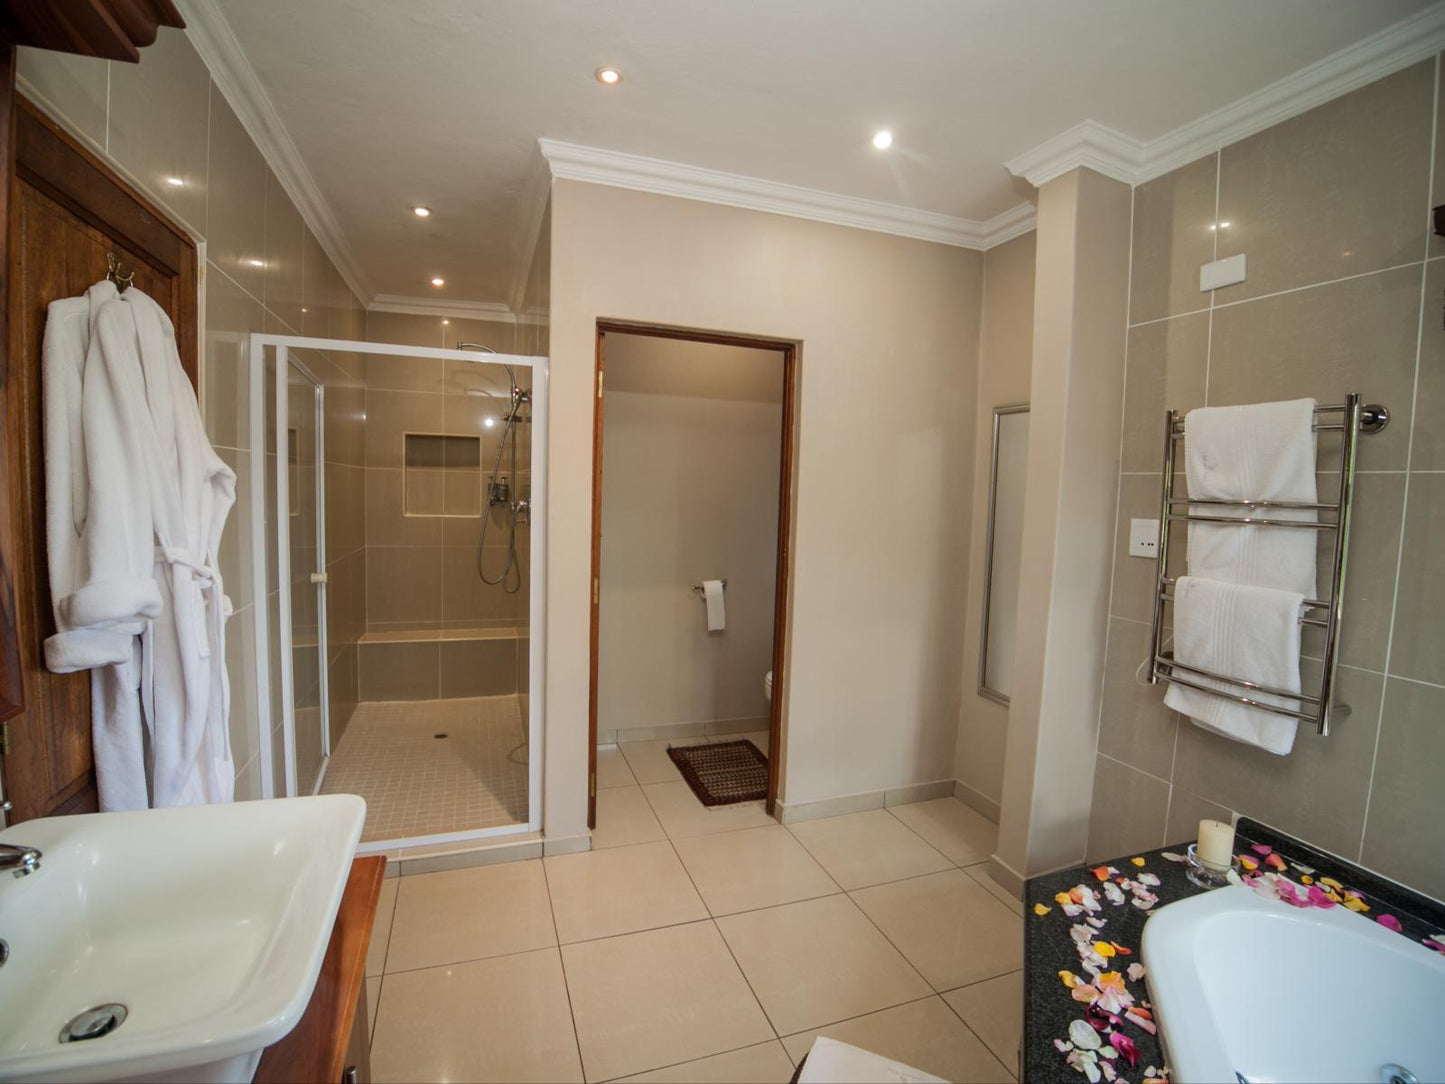 Executive Spa Suite 6 @ Fairview Hotels, Spa & Golf Resort